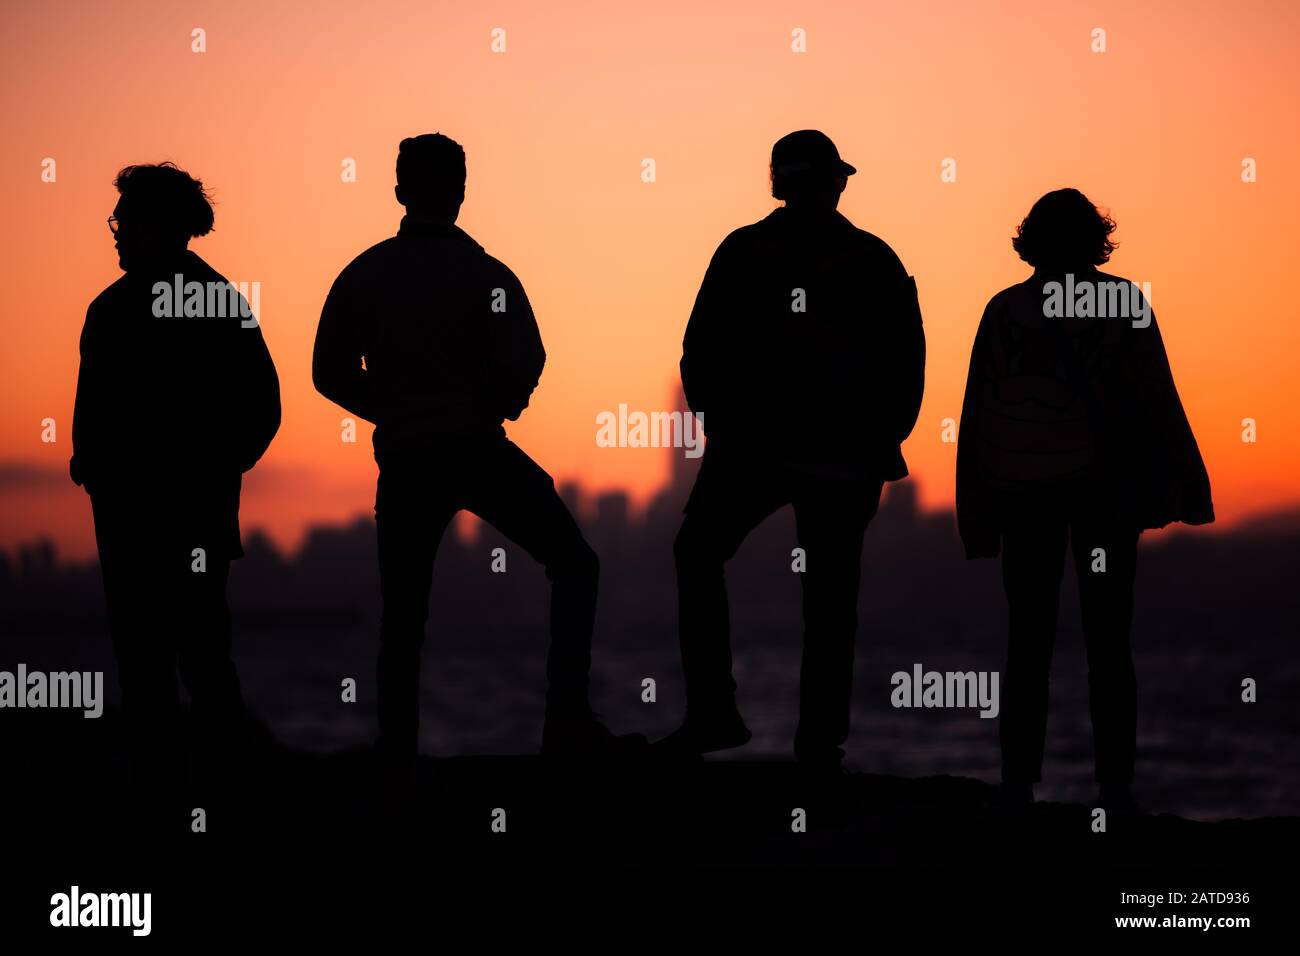 Silhouette of four people looking Sunset, Alameda, California, USA Stock Photo